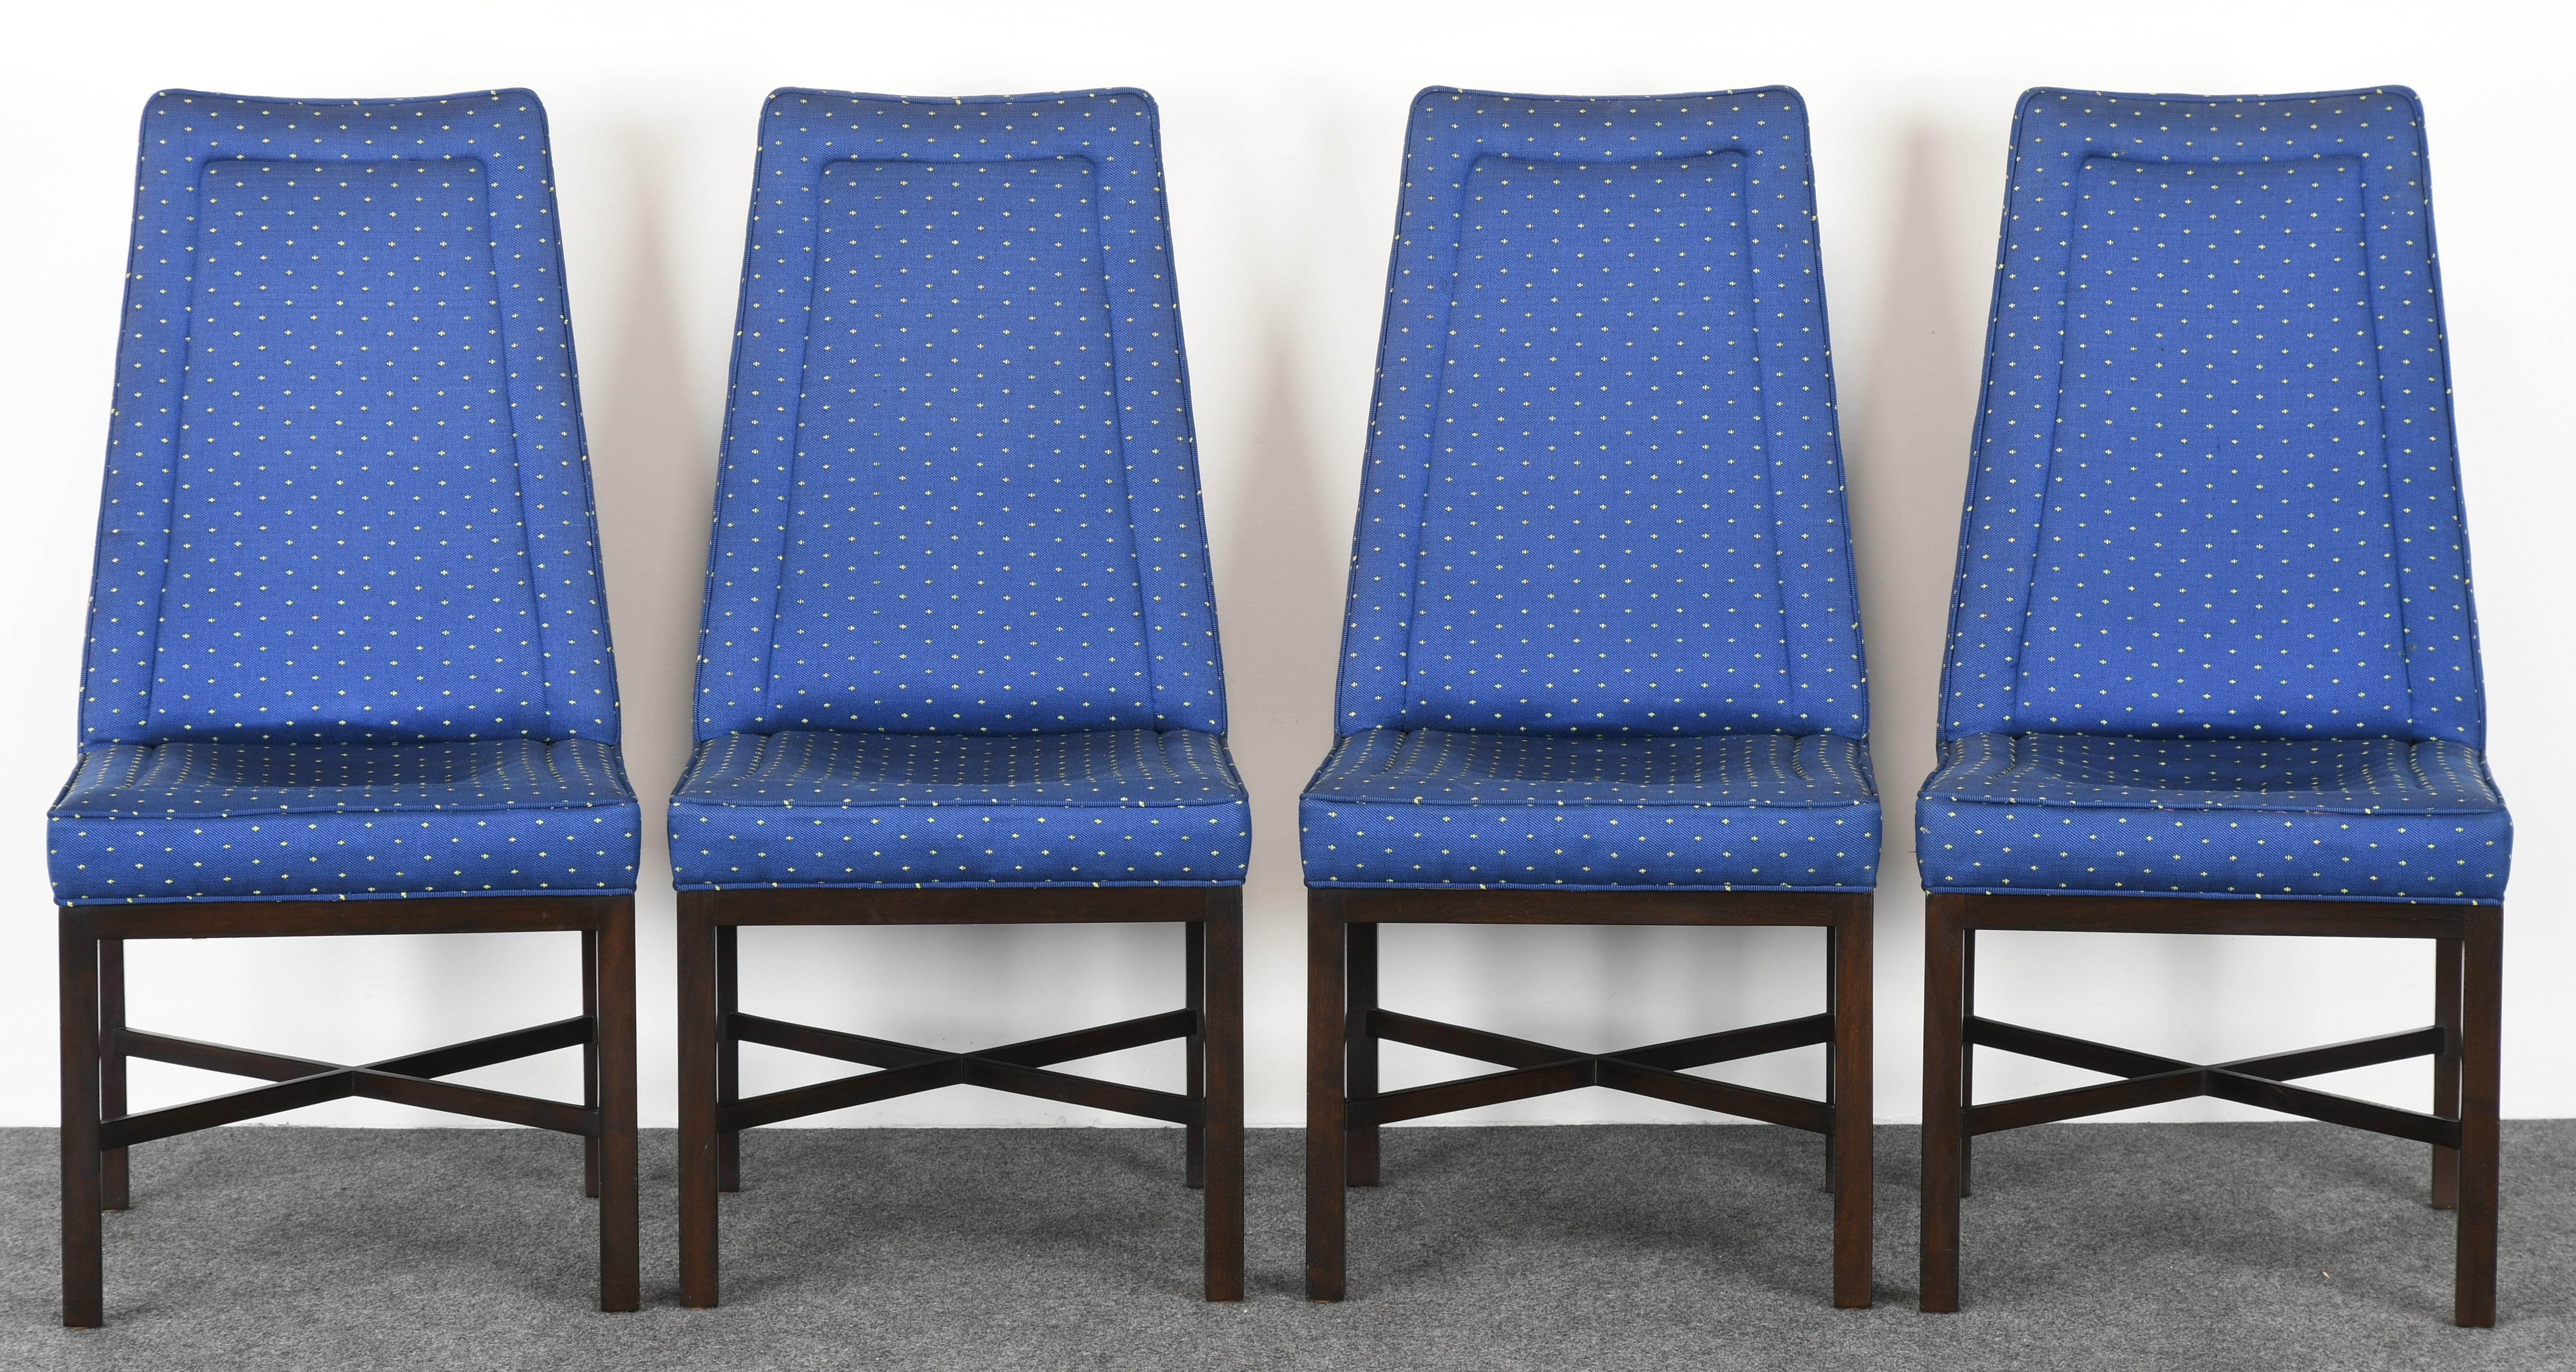 American Set of Eight Roger Sprunger for Dunbar Dining Chairs, 1960s